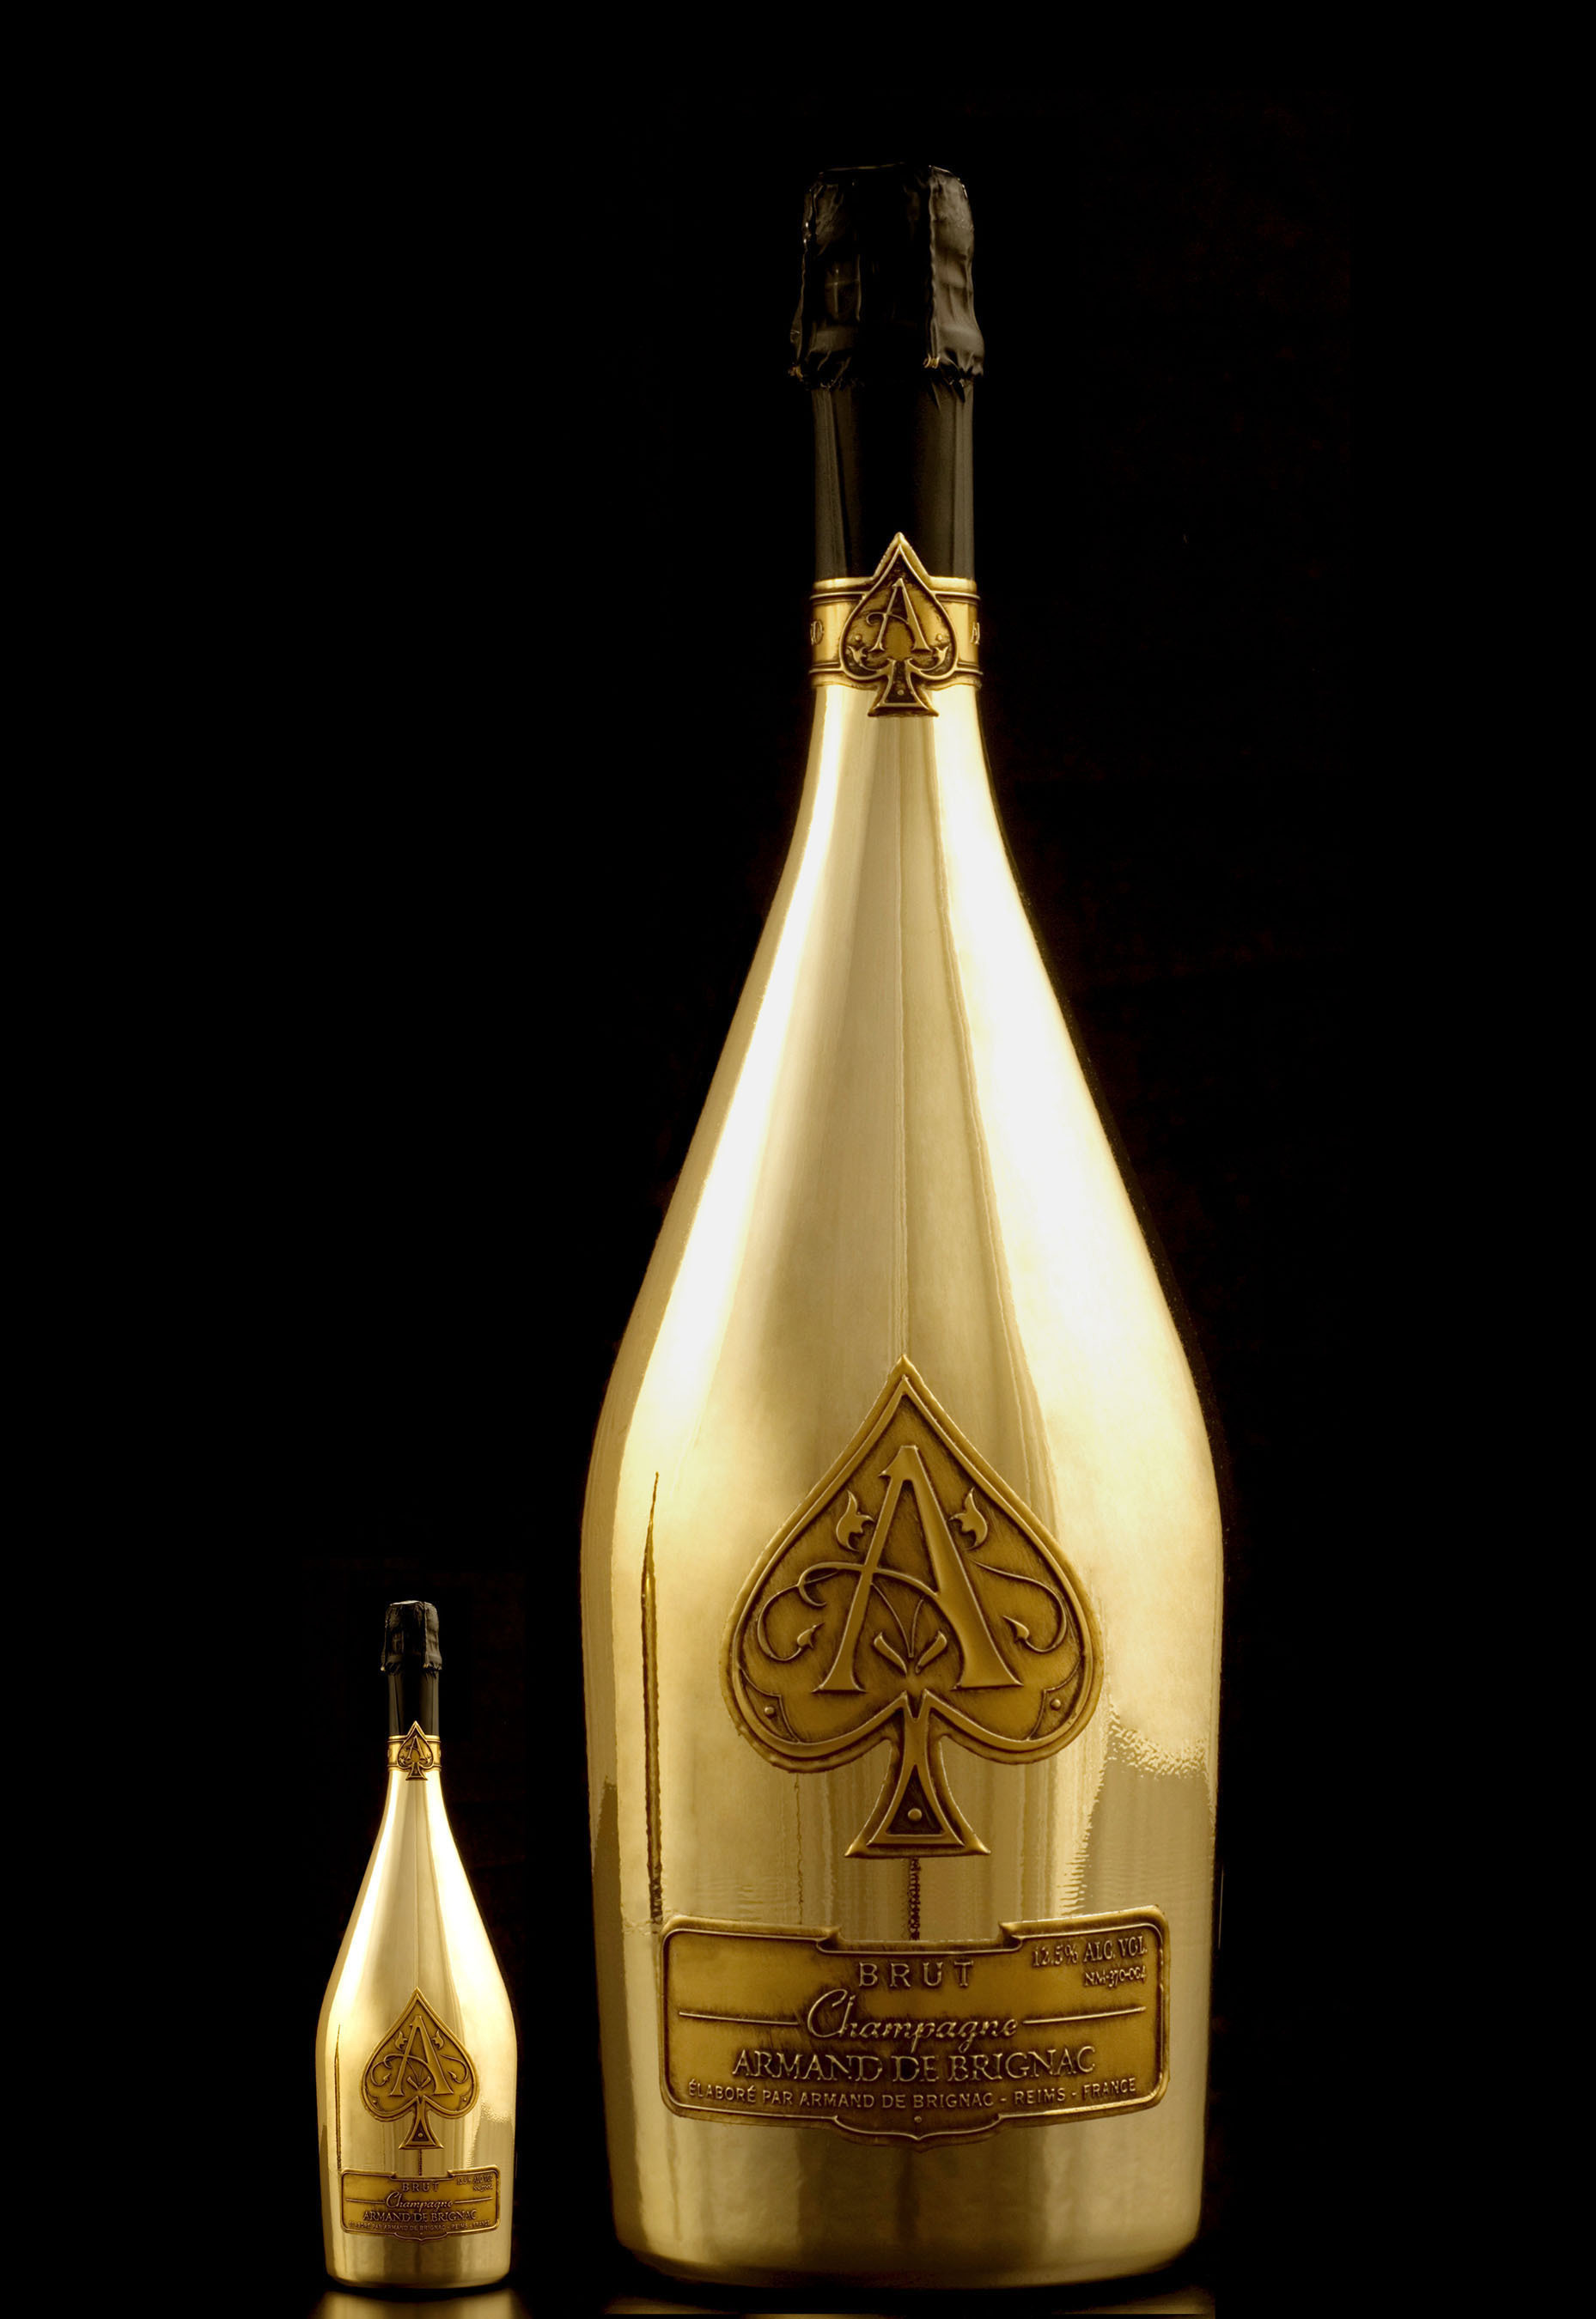 kraai Janice Herformuleren The Most Expensive Bottle of Champagne is Bought in London for $190,000  (120,000 GBP) by U.S. Professional Gambler and Businessman